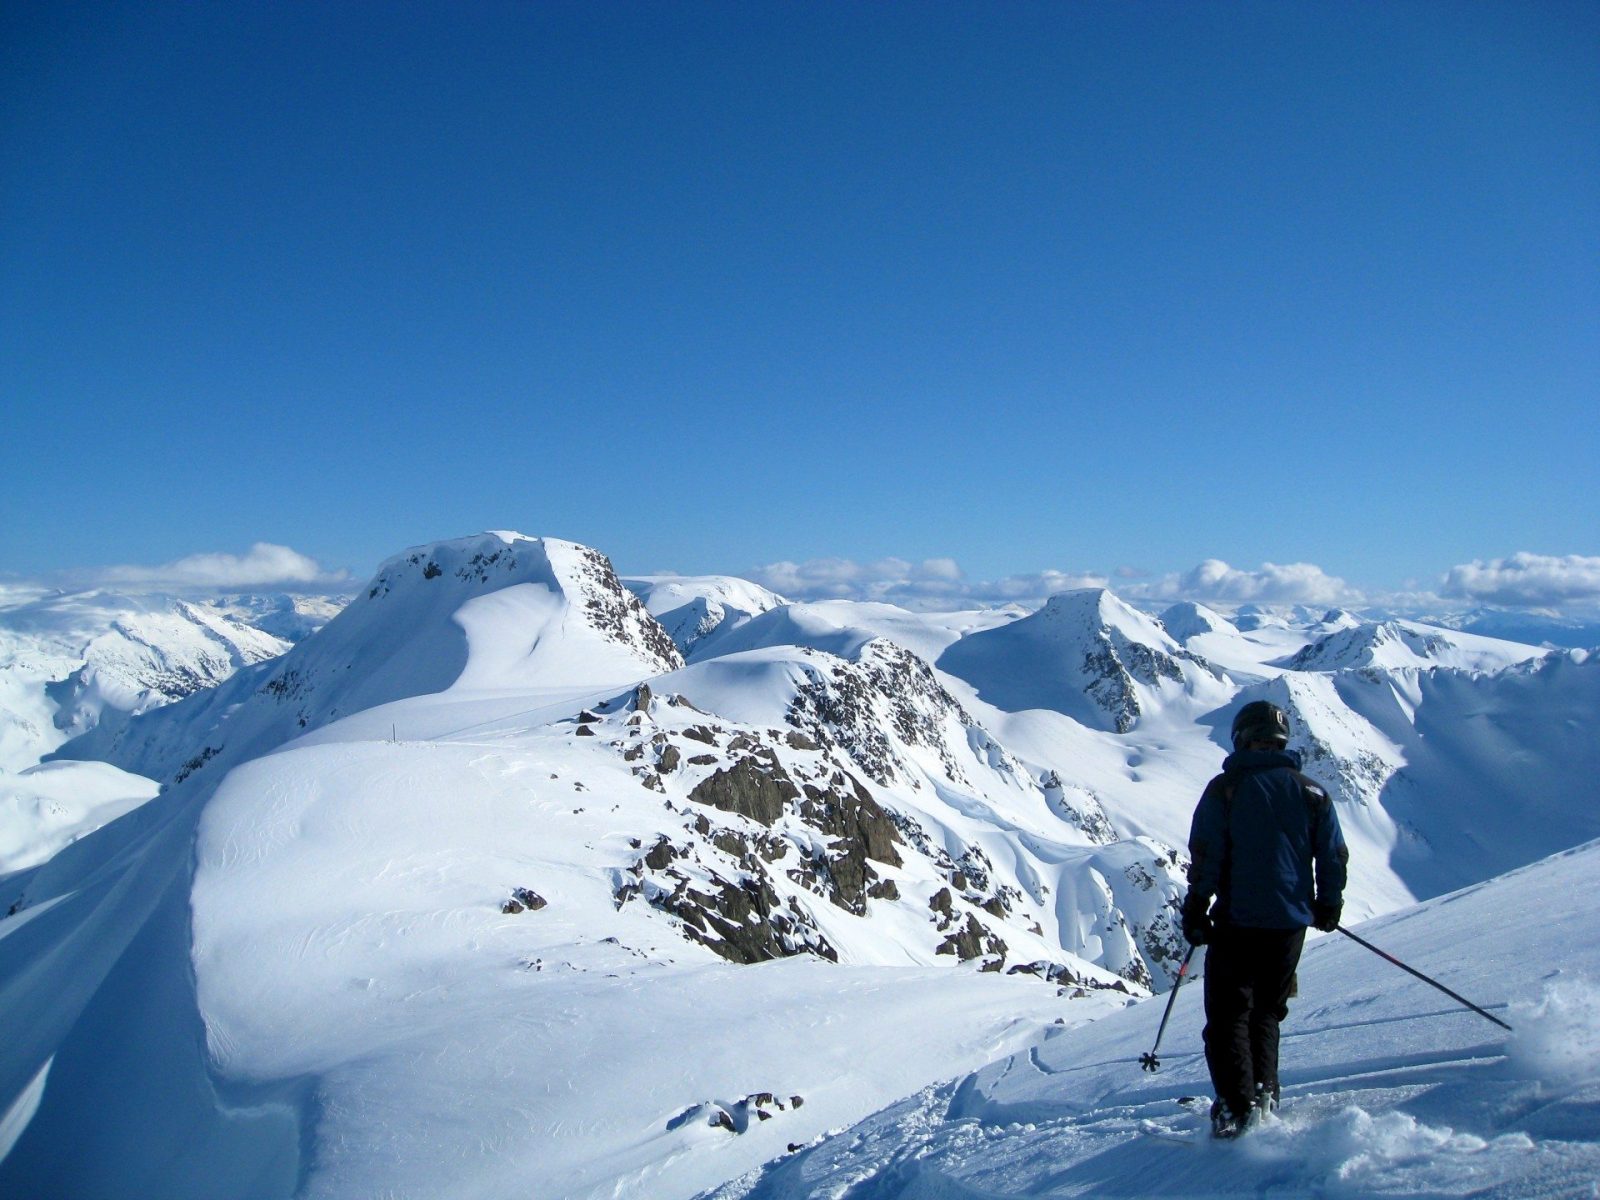 The endless mountains of Whistler are perfect for a winter adventure vacation.